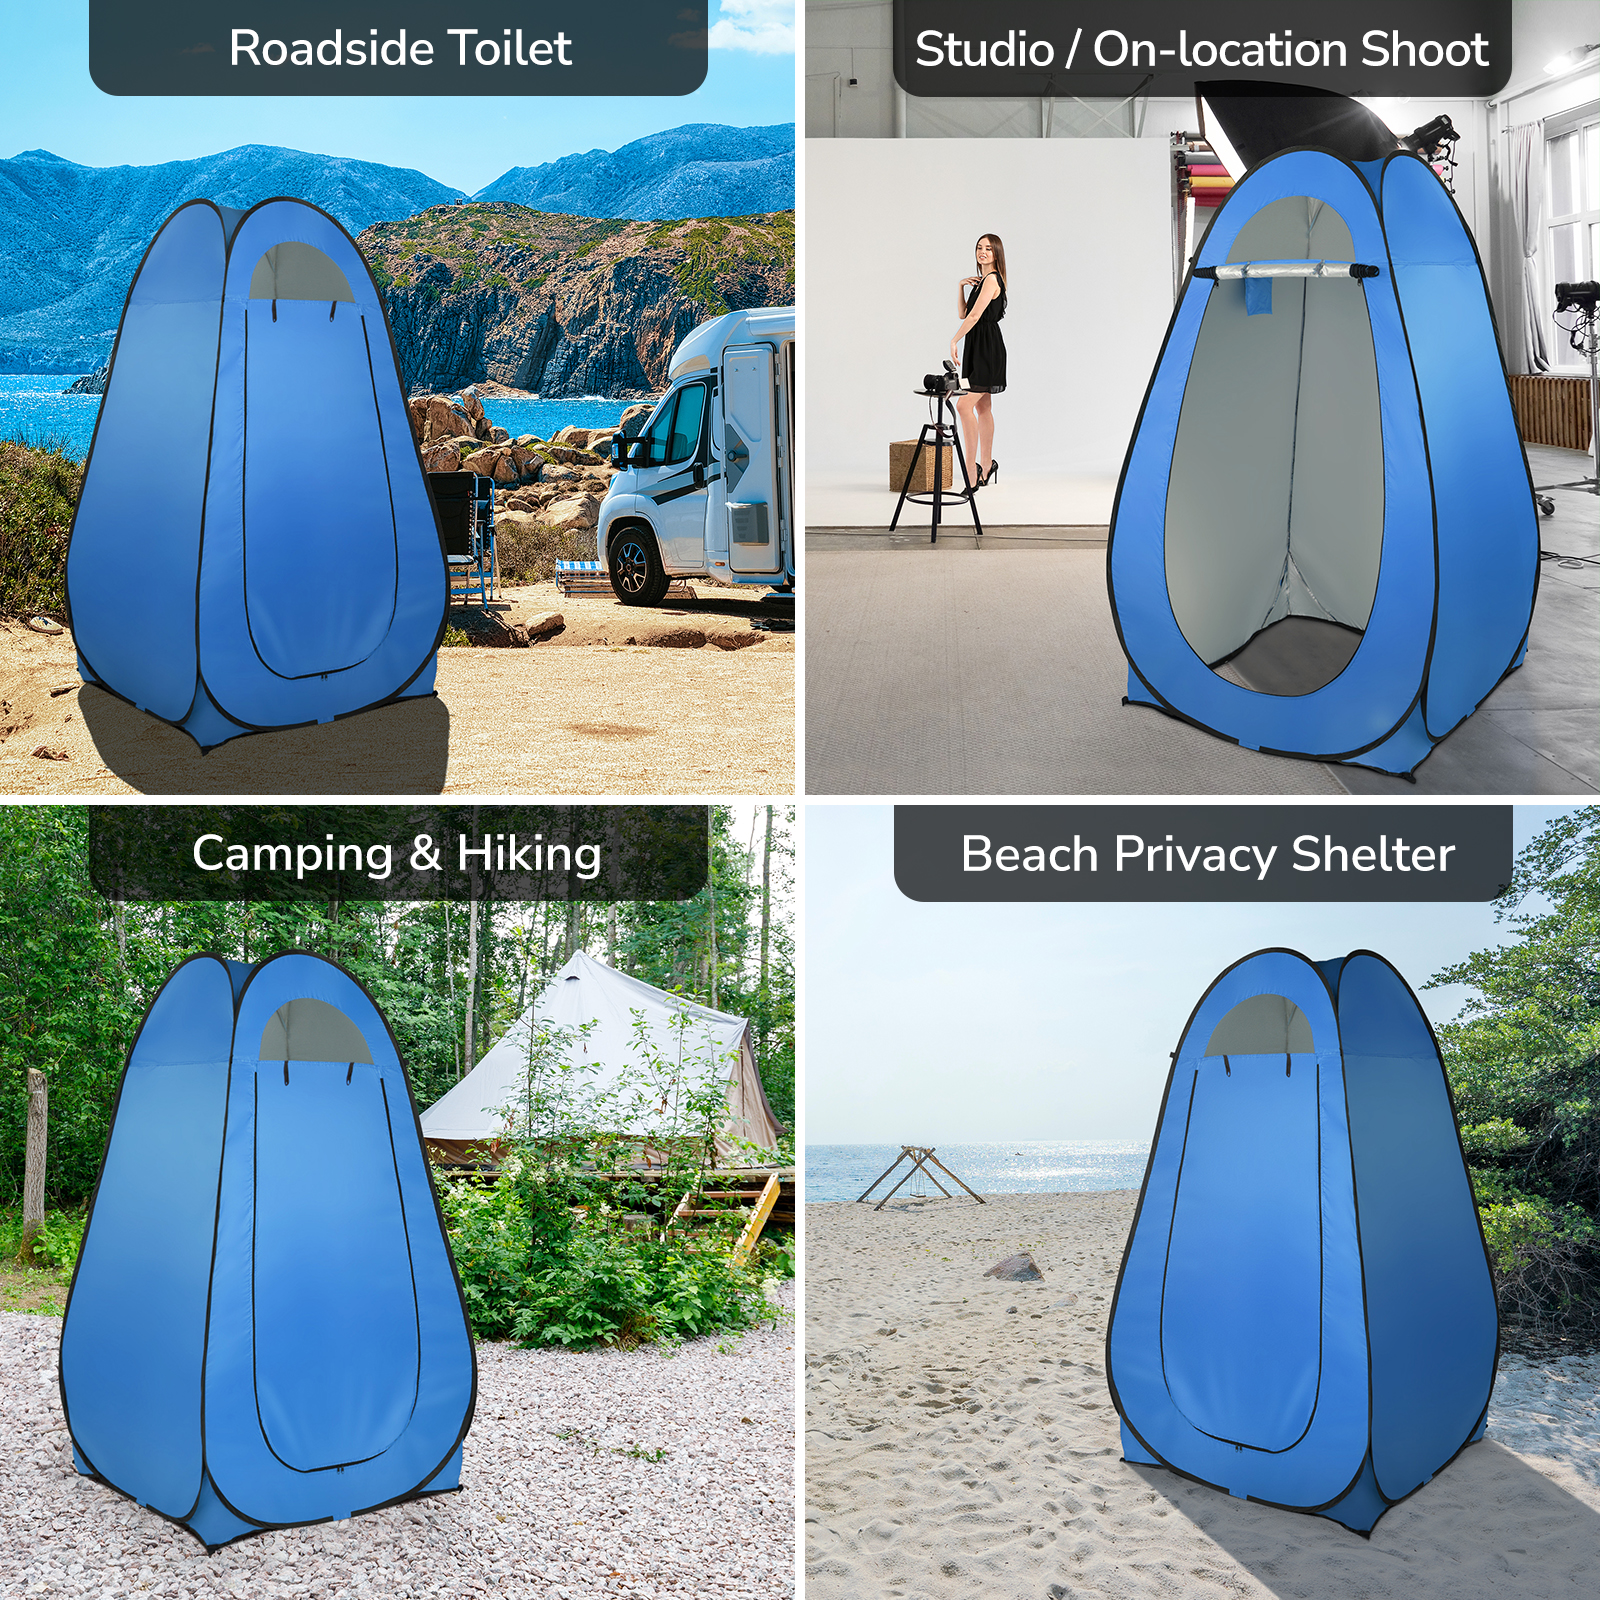 Ktaxon Blue Waterproof Automatic Pop up Oxford Shower Tent Blue - image 4 of 7